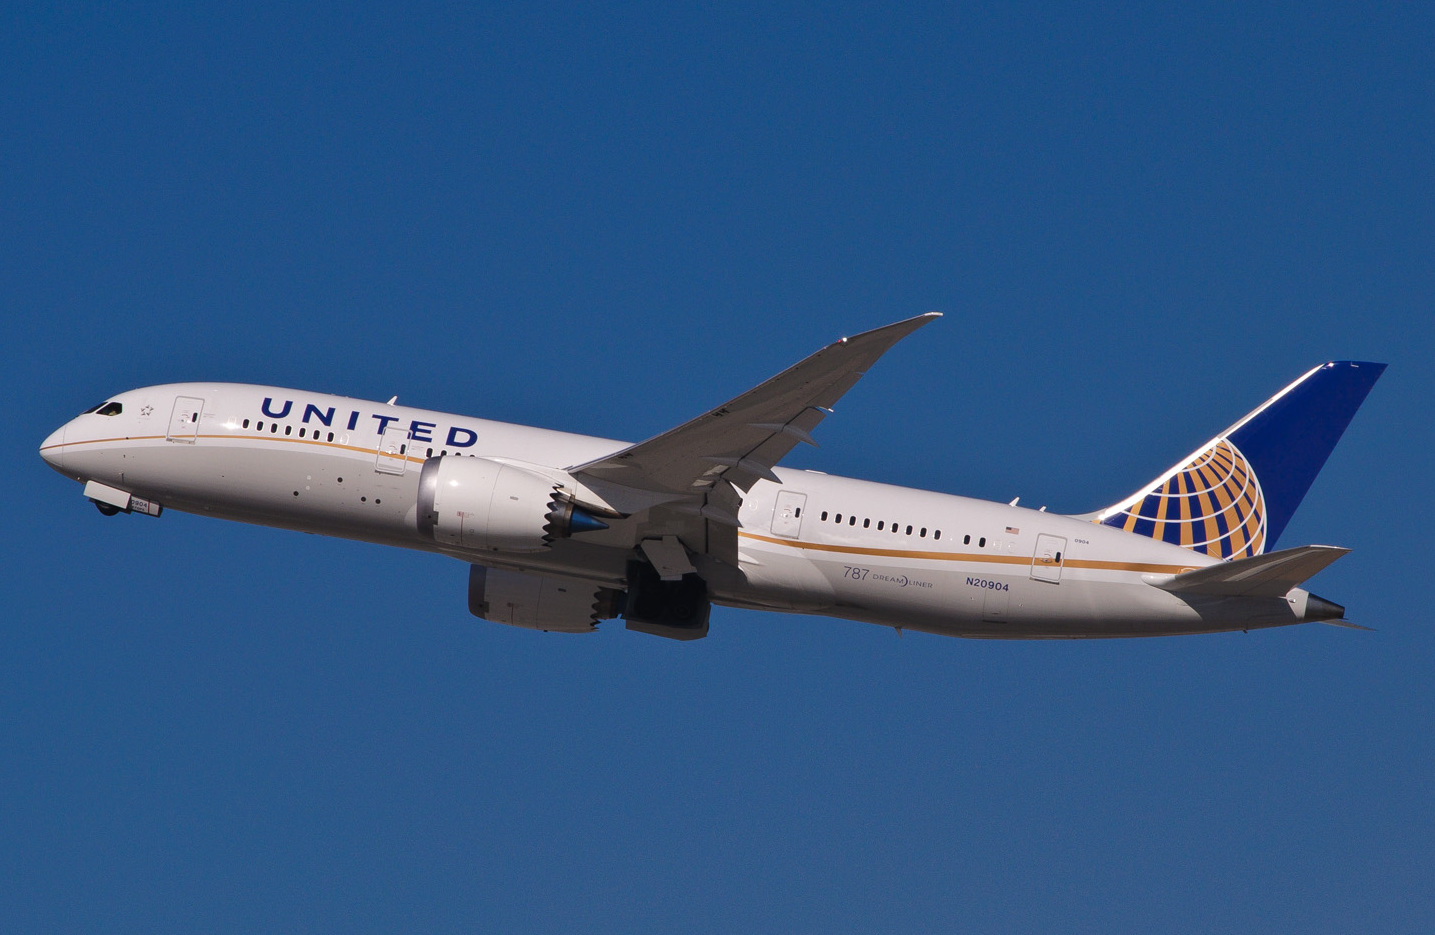 United Airlines Holdings Inc. (NASDAQ:UAL) Posts $1.8 Billion Loss Amid Slow Recovery Warning